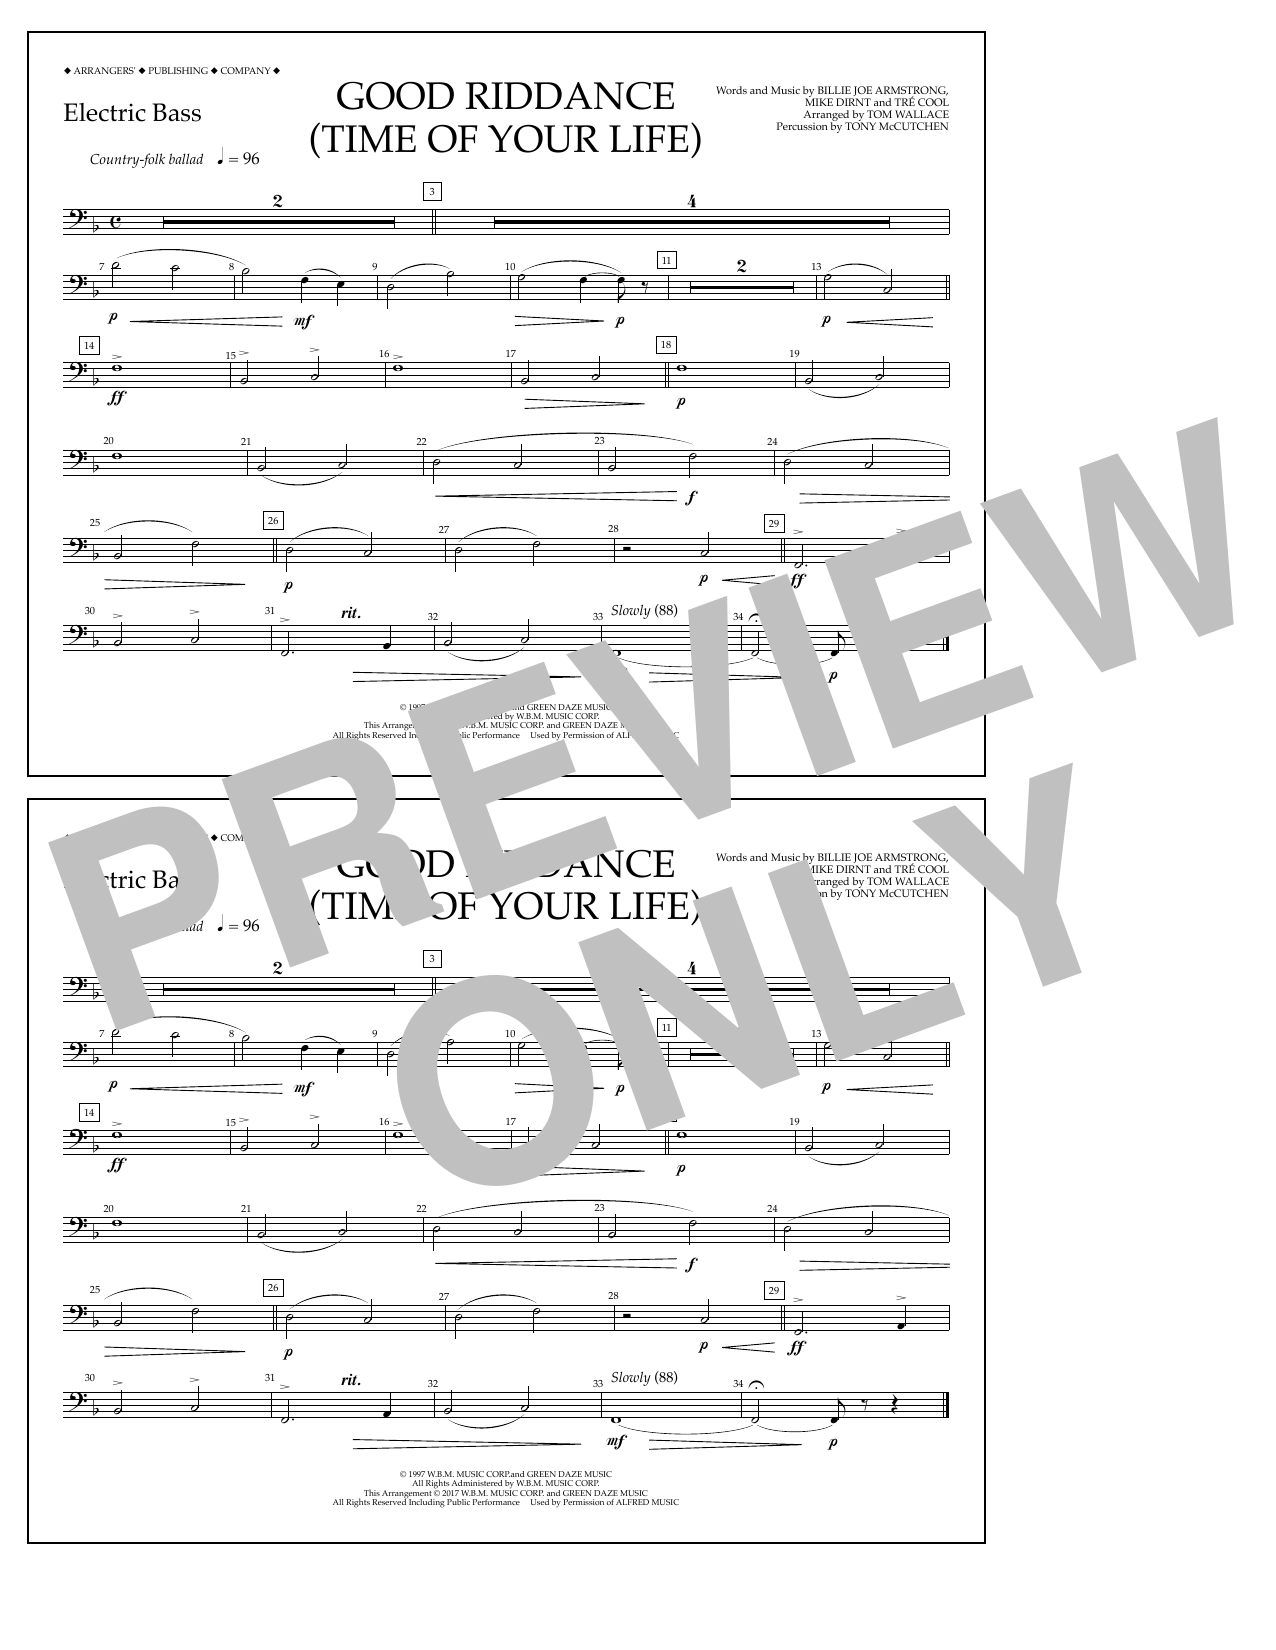 Download Tom Wallace Good Riddance (Time of Your Life) - Ele Sheet Music